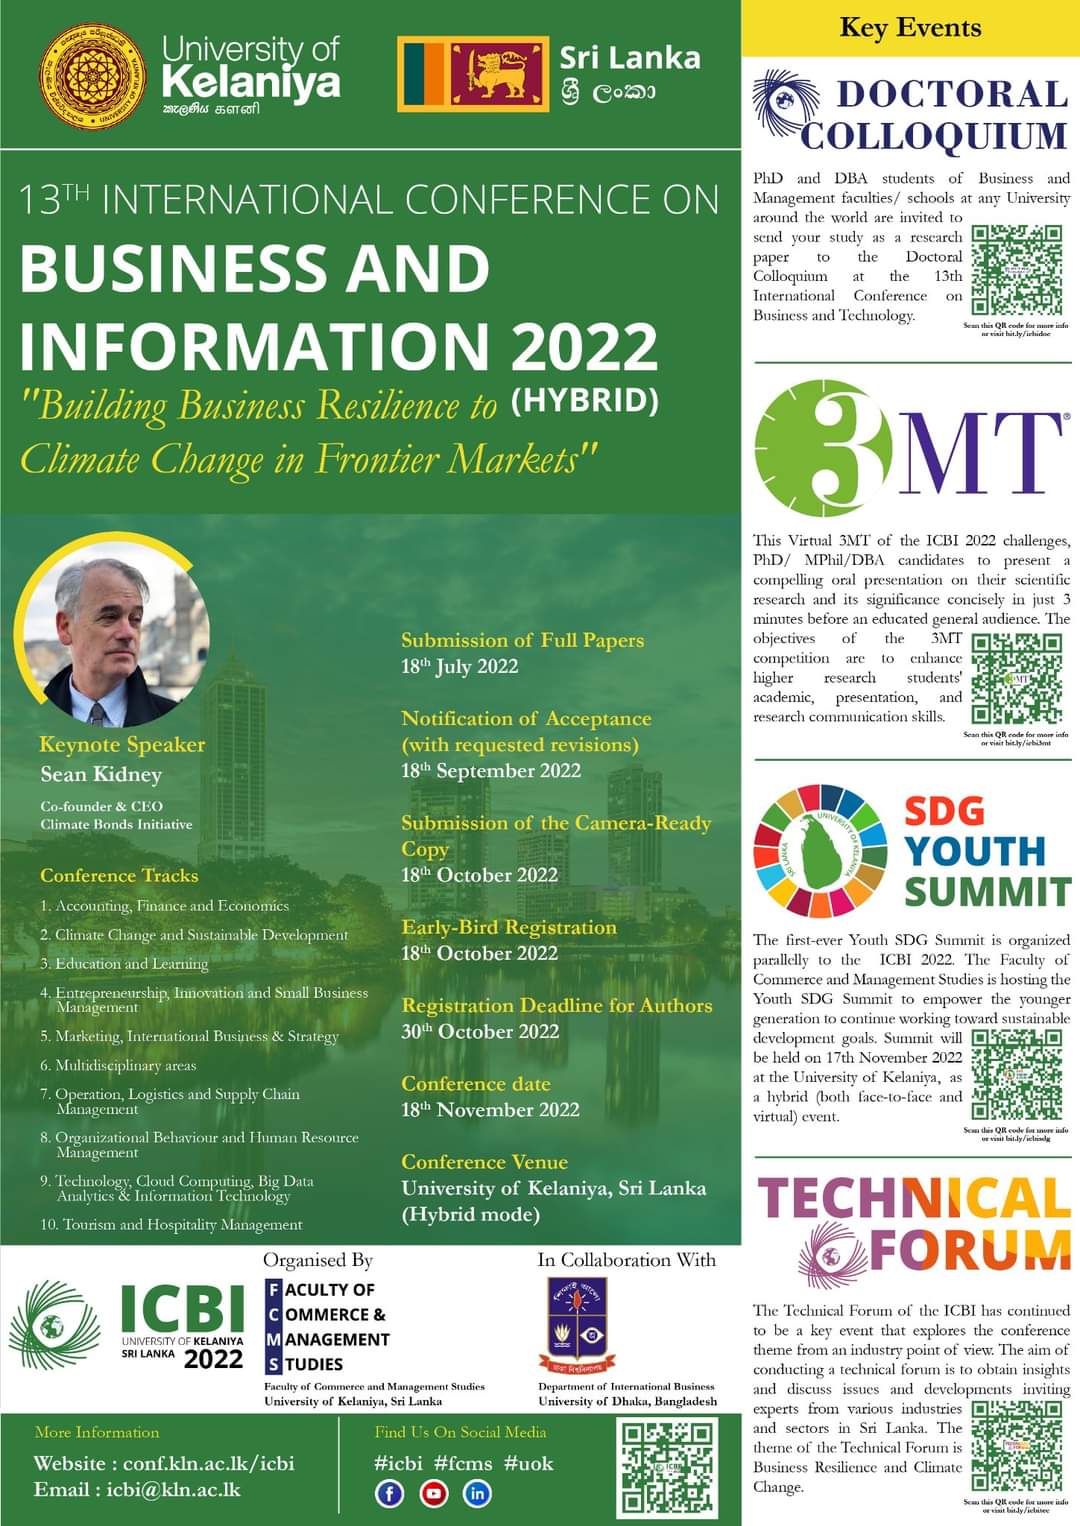 13th International Conference on Business and Information 2022